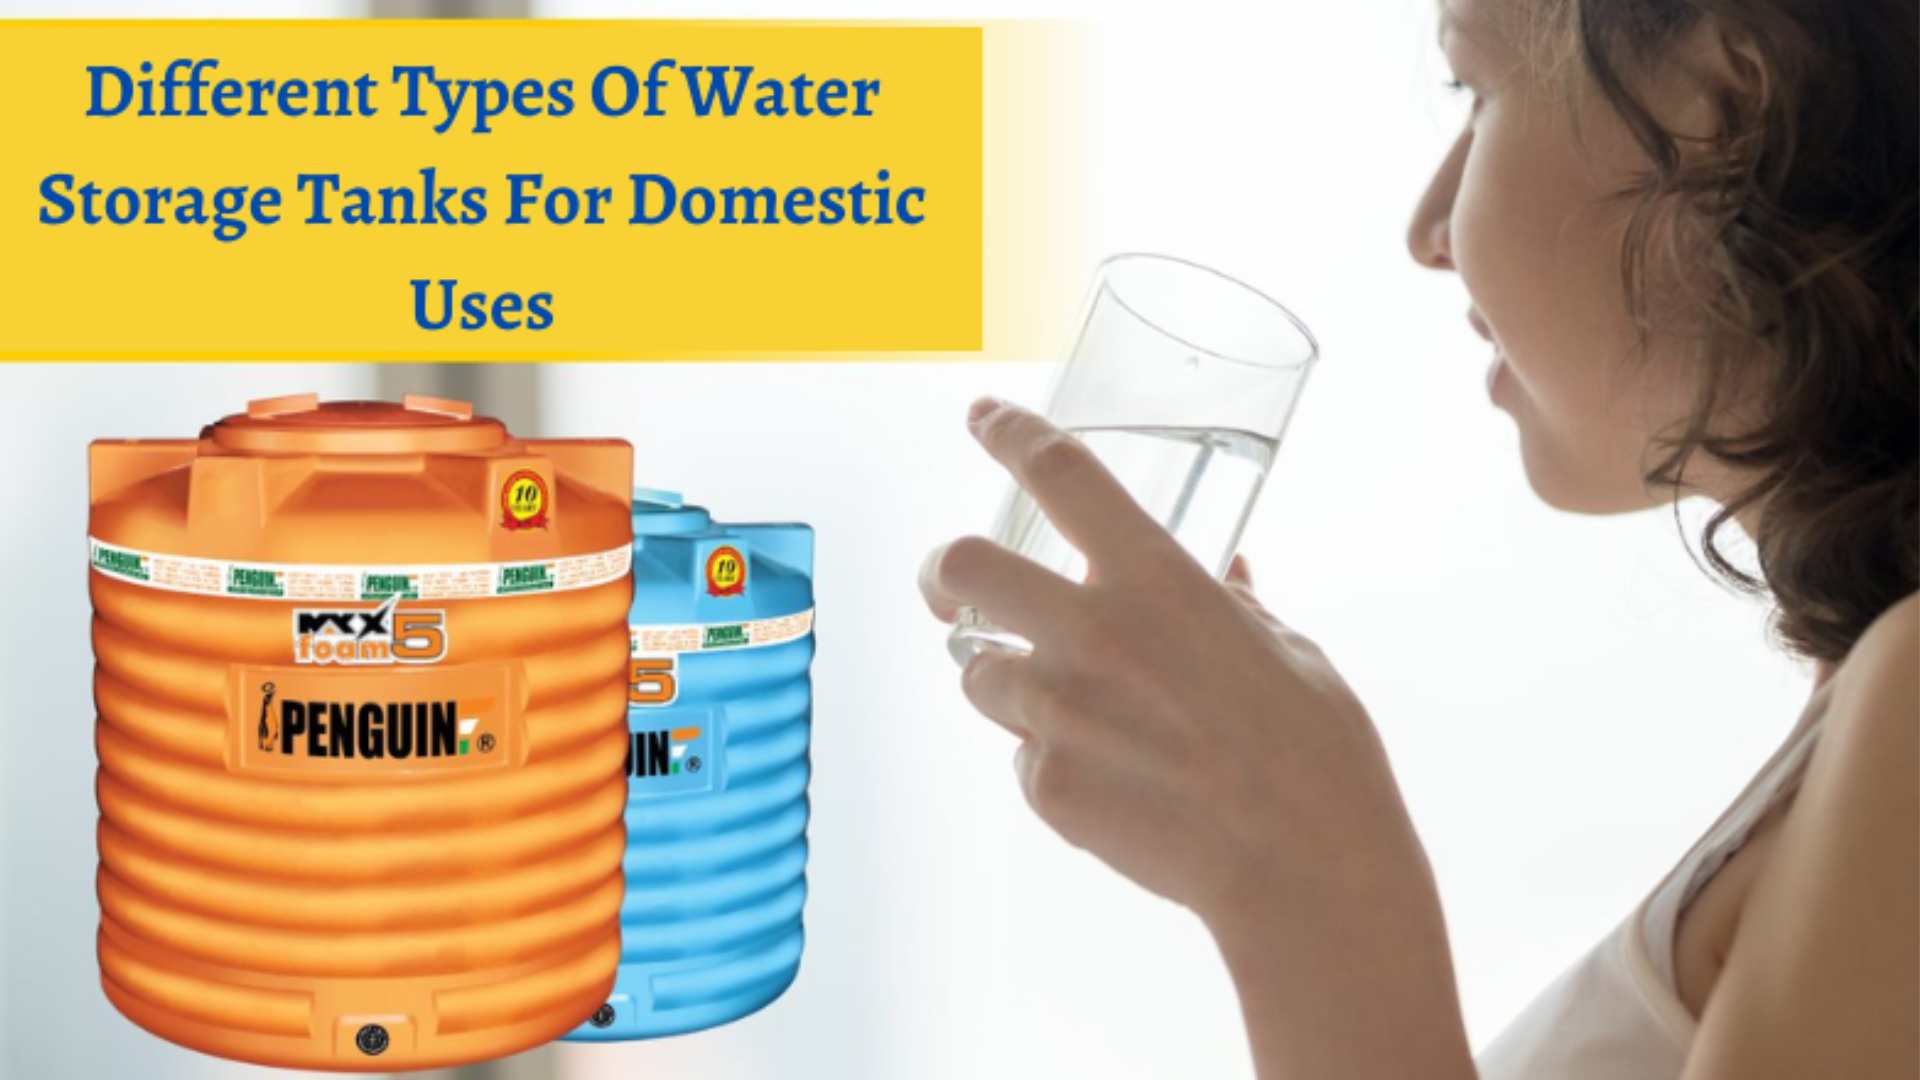 Different Types Of Water Storage Tanks For Domestic Uses